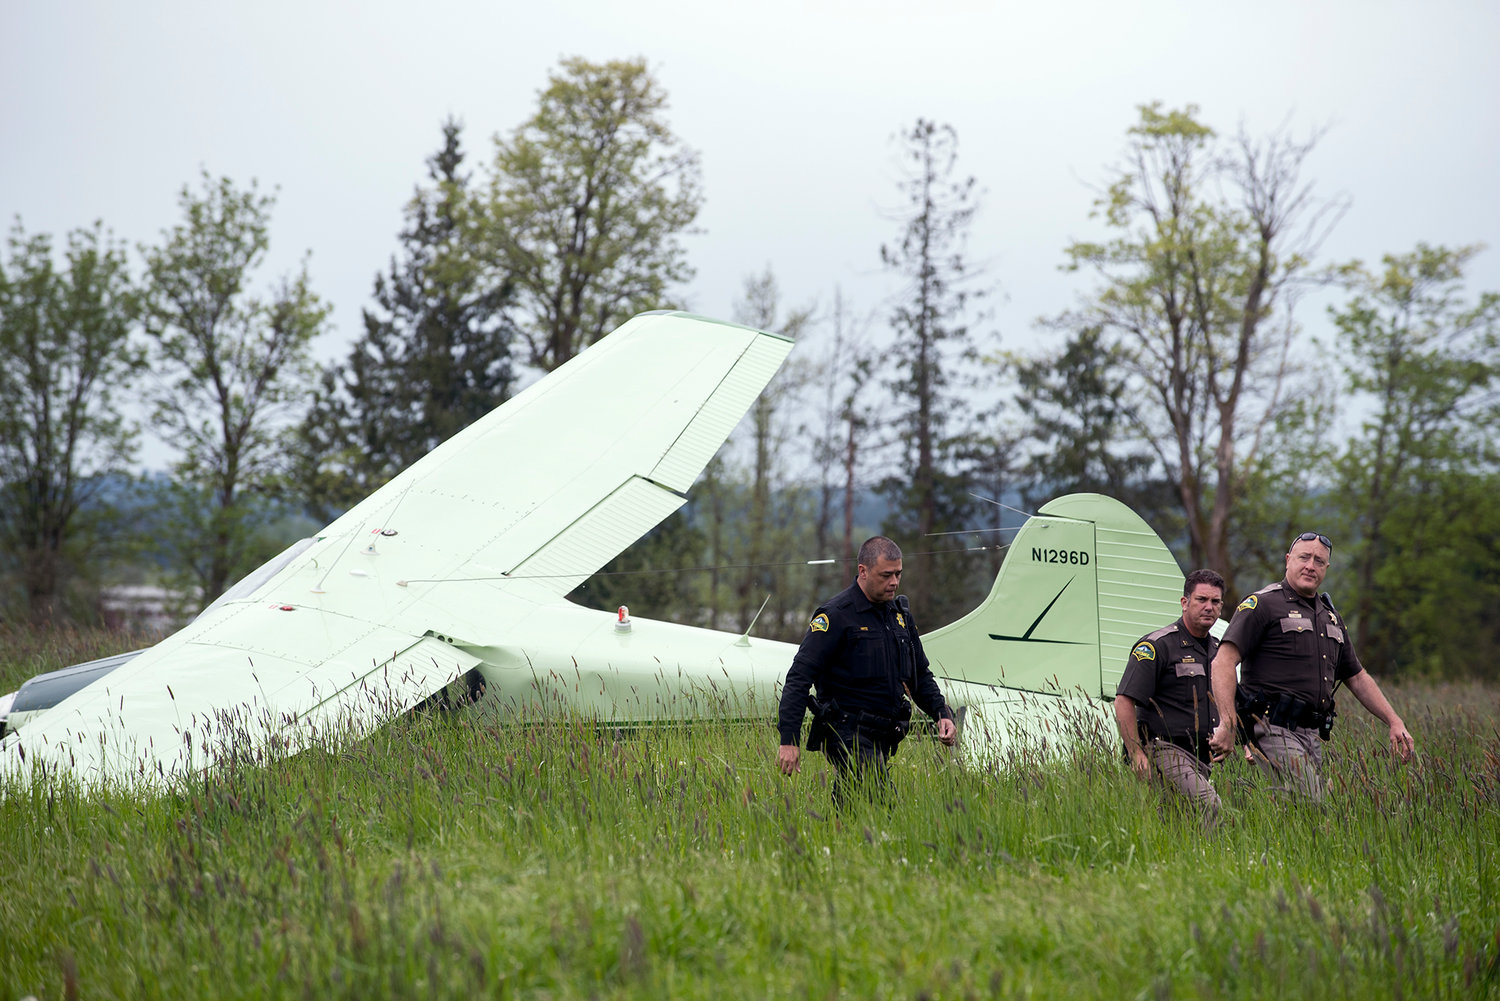 Personal from the Thurston County Sheriff's Department leave the scene of a crash landing on Tuesday afternoon in a field off of Oregon Trail Road in Grand Mound. A 73-year-old man piloted the plane to the ground and was flown to Harbourview Medical Center in stable condition.